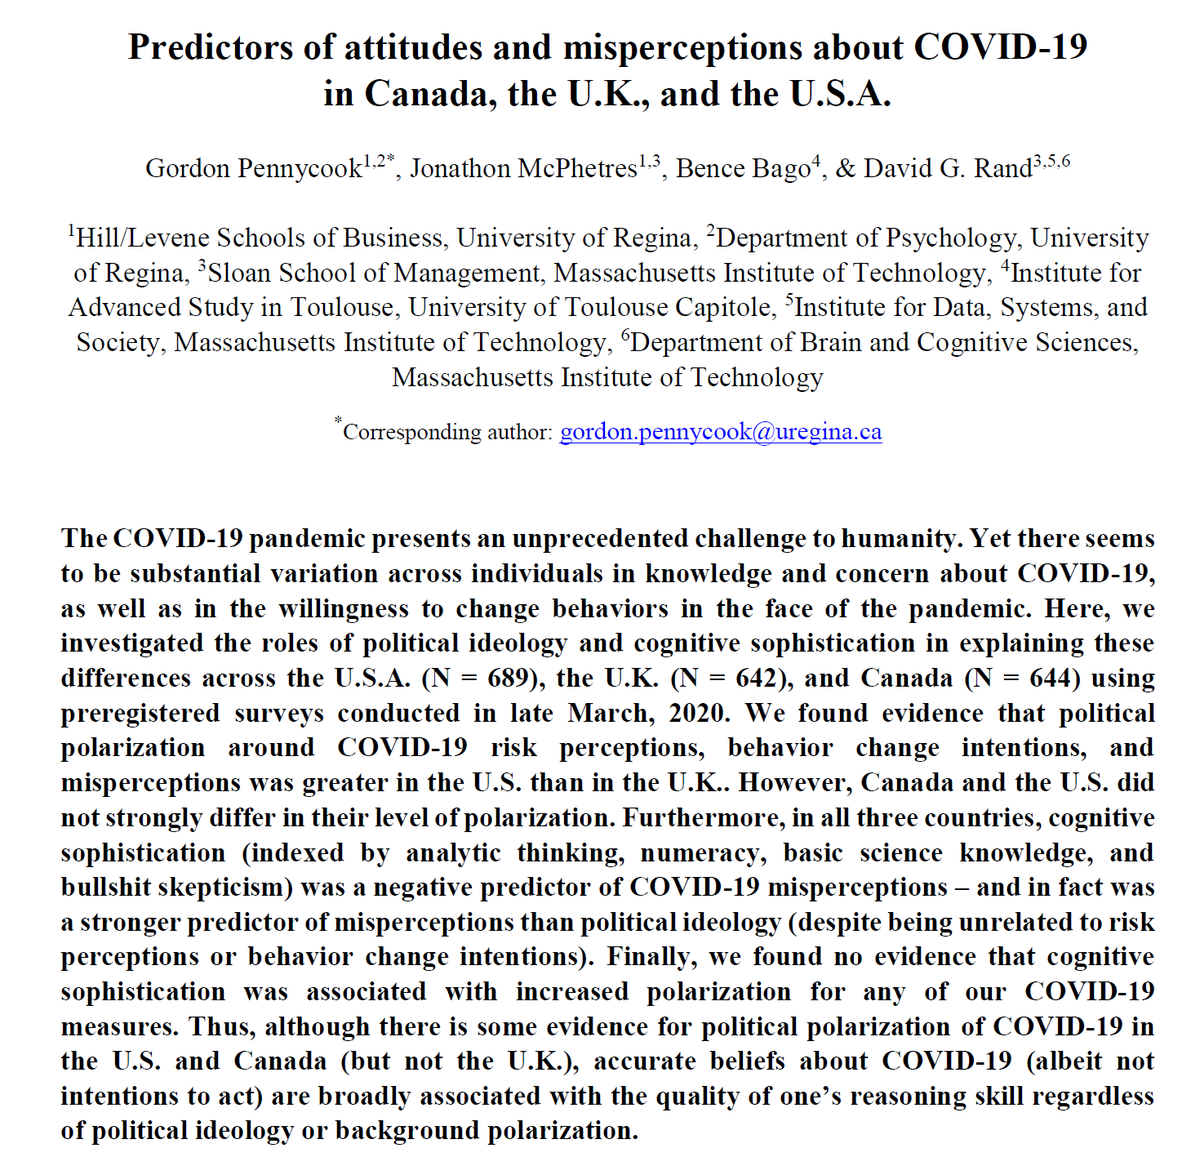 New WP on attitudes about COVID-19!  https://psyarxiv.com/zhjkp/  - Political polarization is stronger in the U.S. than U.K. - But misperceptions are more strongly predicted by IQ than ideology (even in the U.S.)- No evidence for politically motivated reasoning (even in the U.S.)